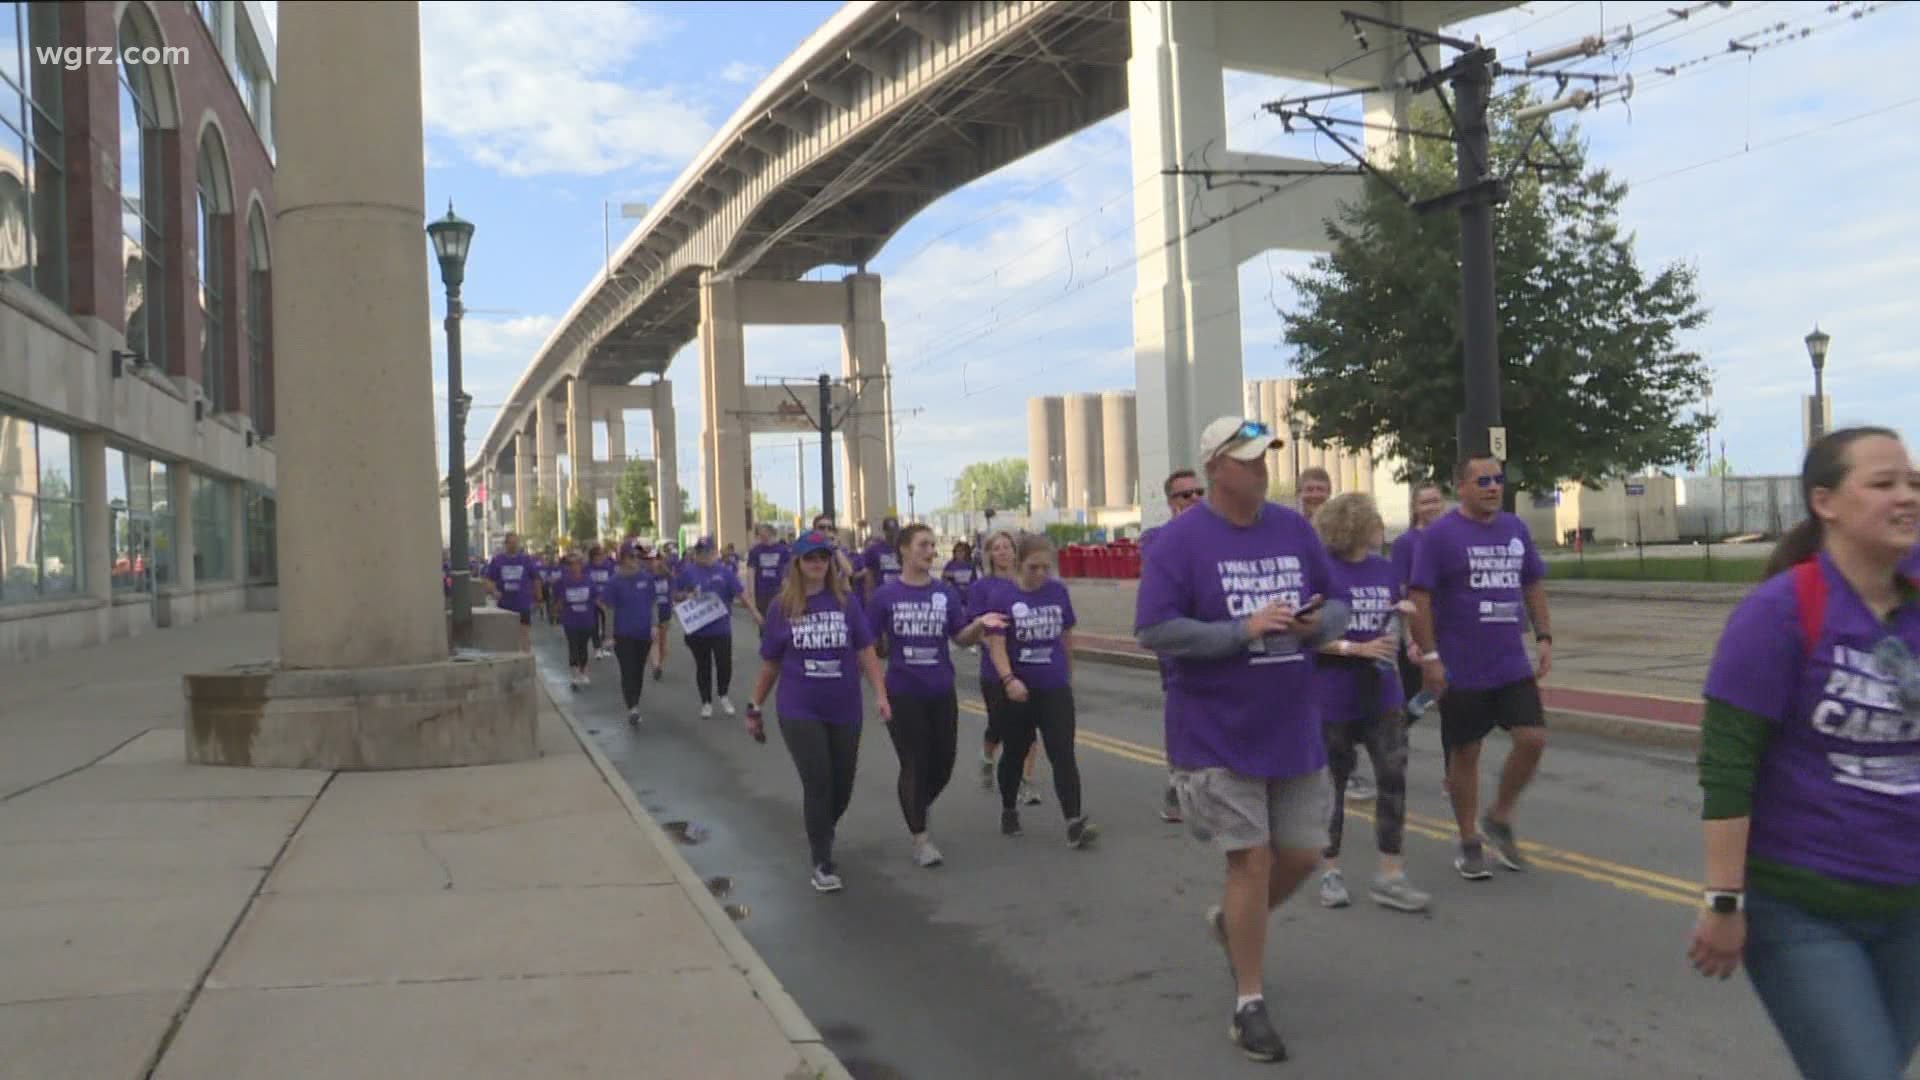 The PurpleStride walk raises money for and awareness of the Pancreatic Cancer Action Network.